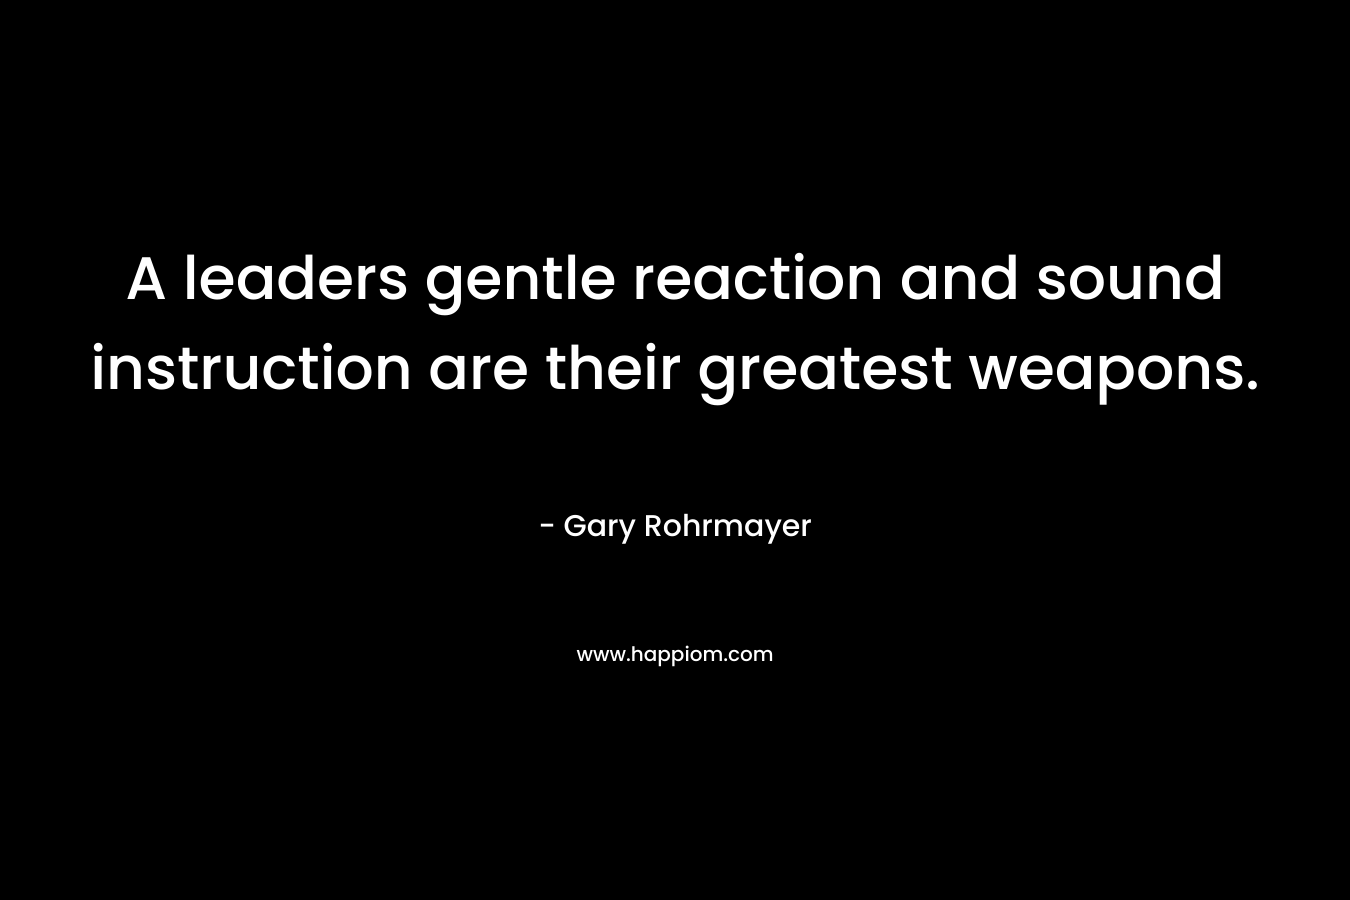 A leaders gentle reaction and sound instruction are their greatest weapons. – Gary Rohrmayer